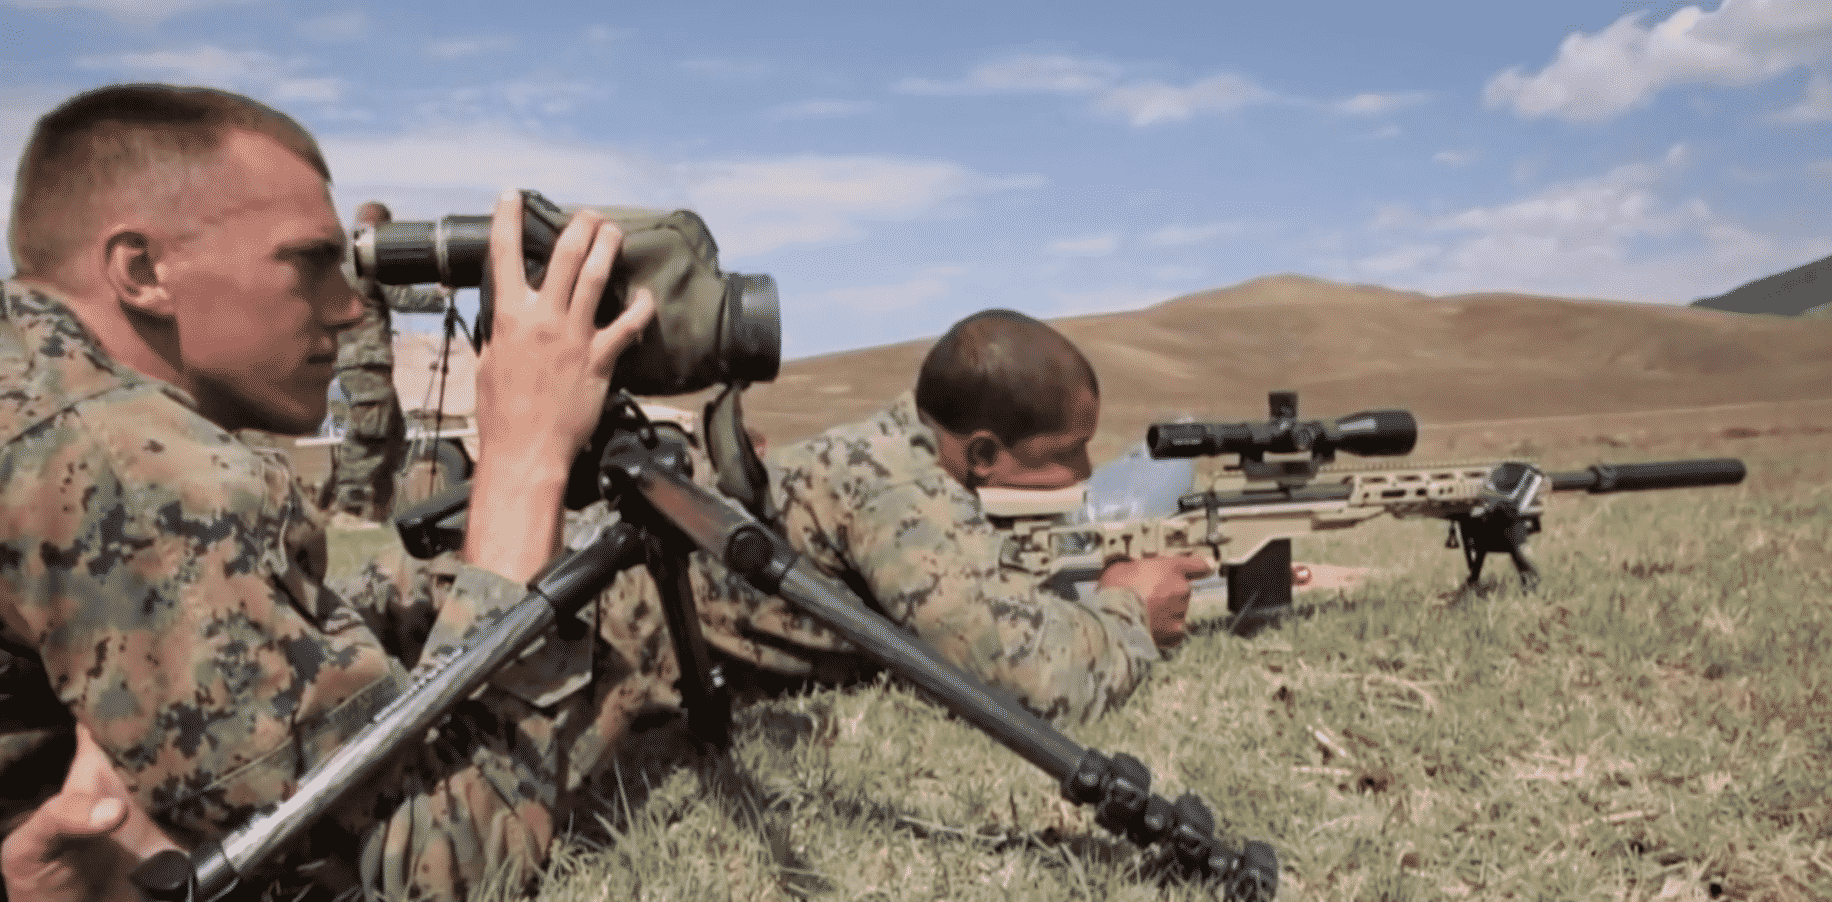 Rifles are Limiting Say Marine Snipers - UAT Group